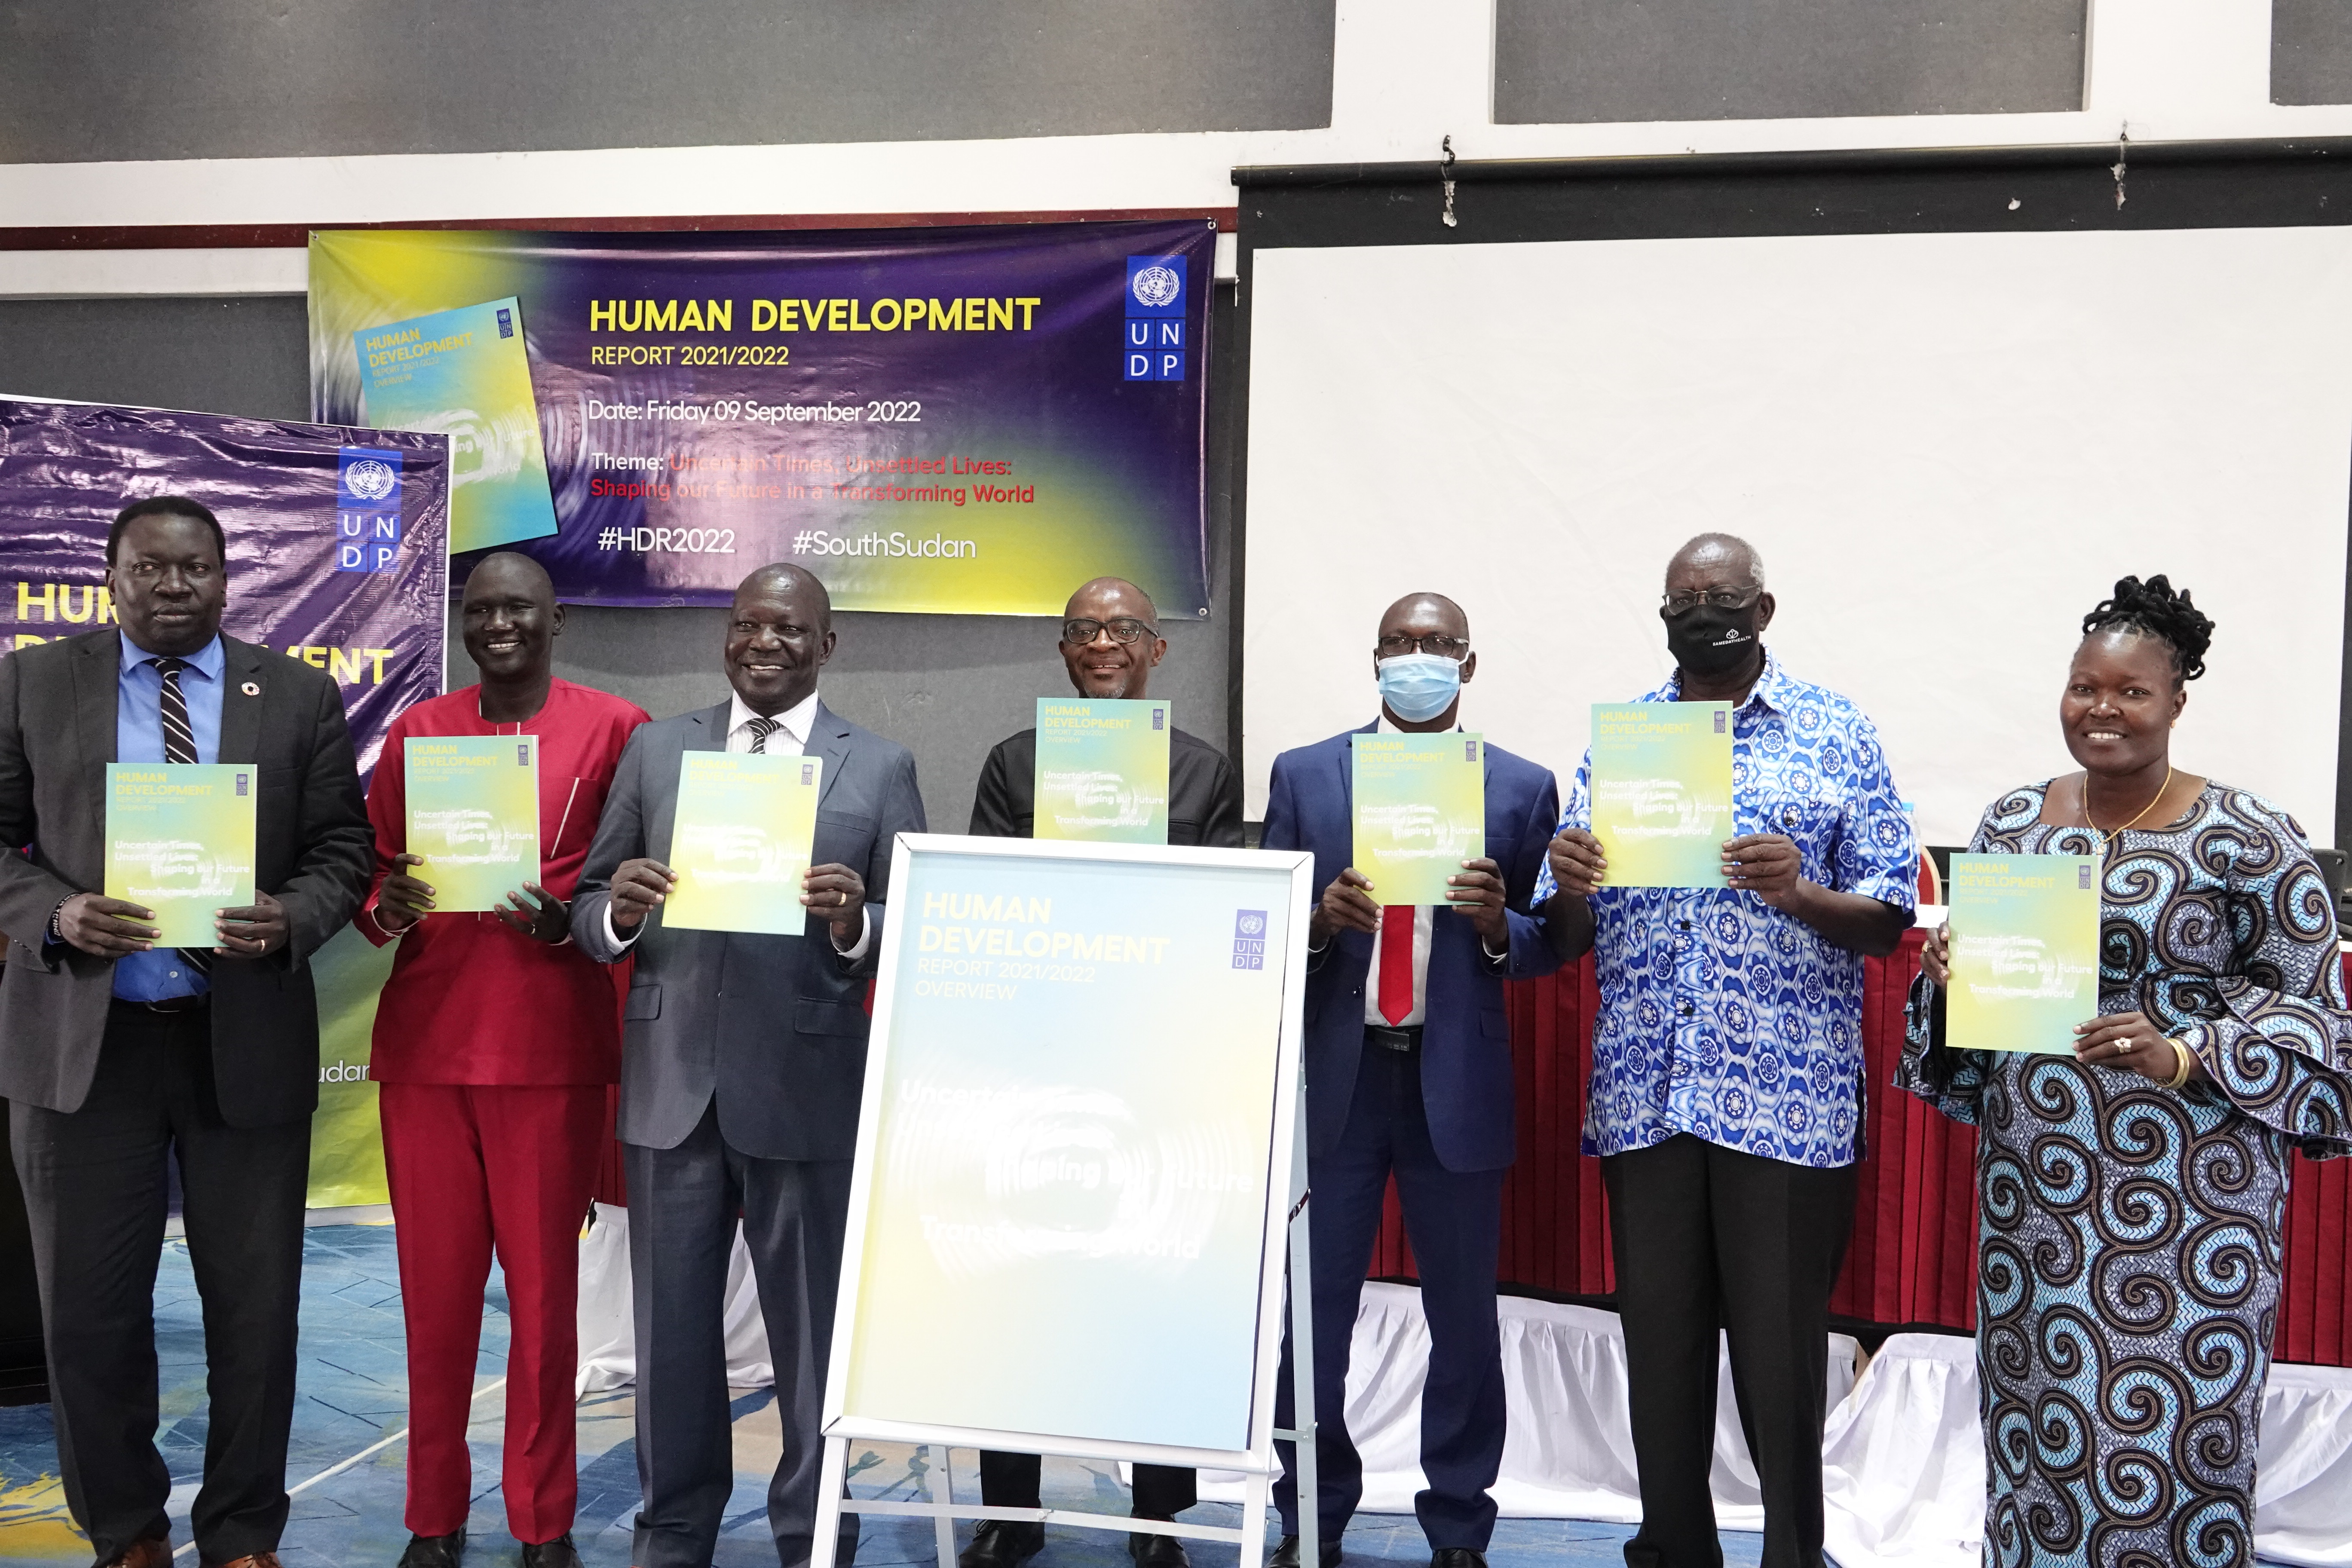 HDR 2022 Launch in South Sudan